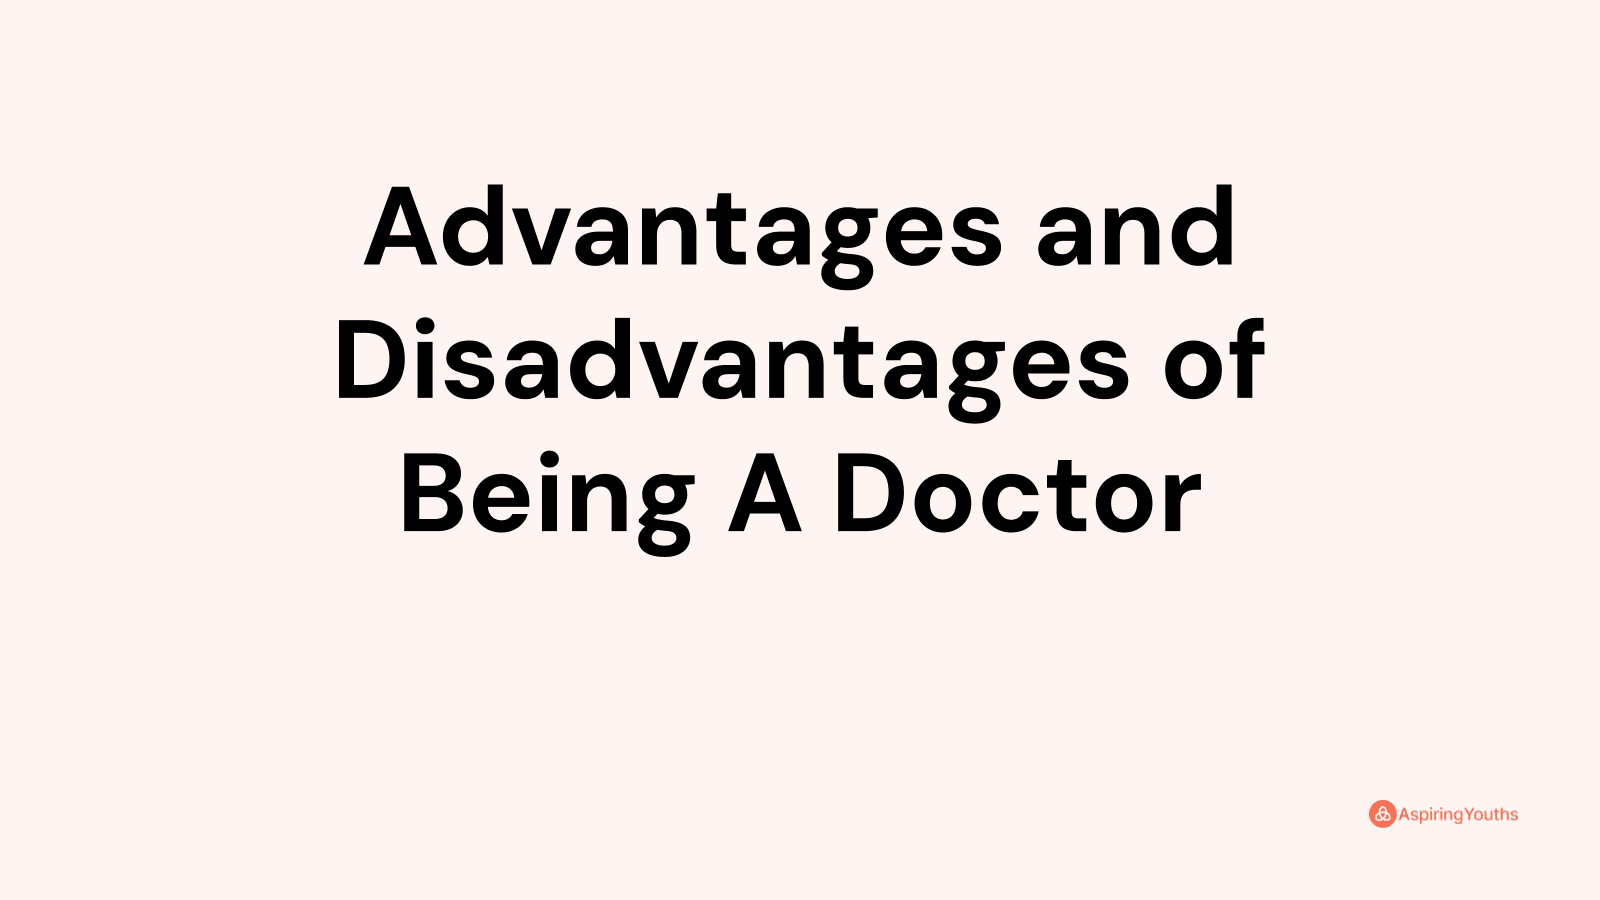 Advantages and disadvantages of Being A Doctor